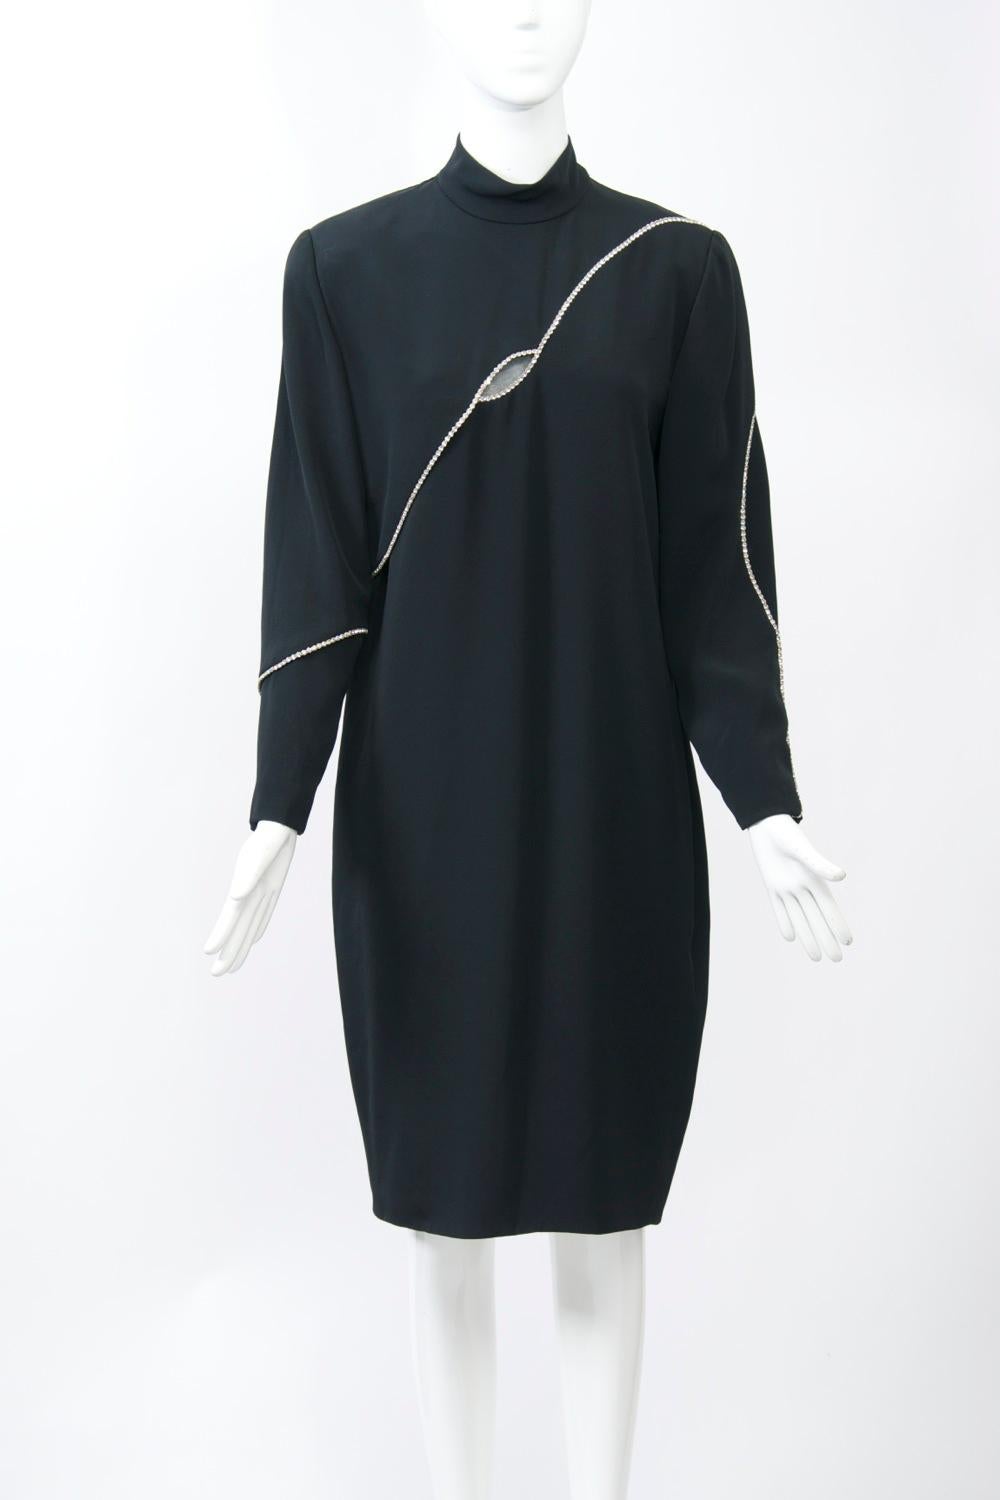 The Boston-area boutique Cyreld, named for its founder Cyreld Spiller, was known for its high quality fashion and famous clientele from the mid 1950s until 1995. This simple black cocktail dress is distinguished by its interesting embellishment -